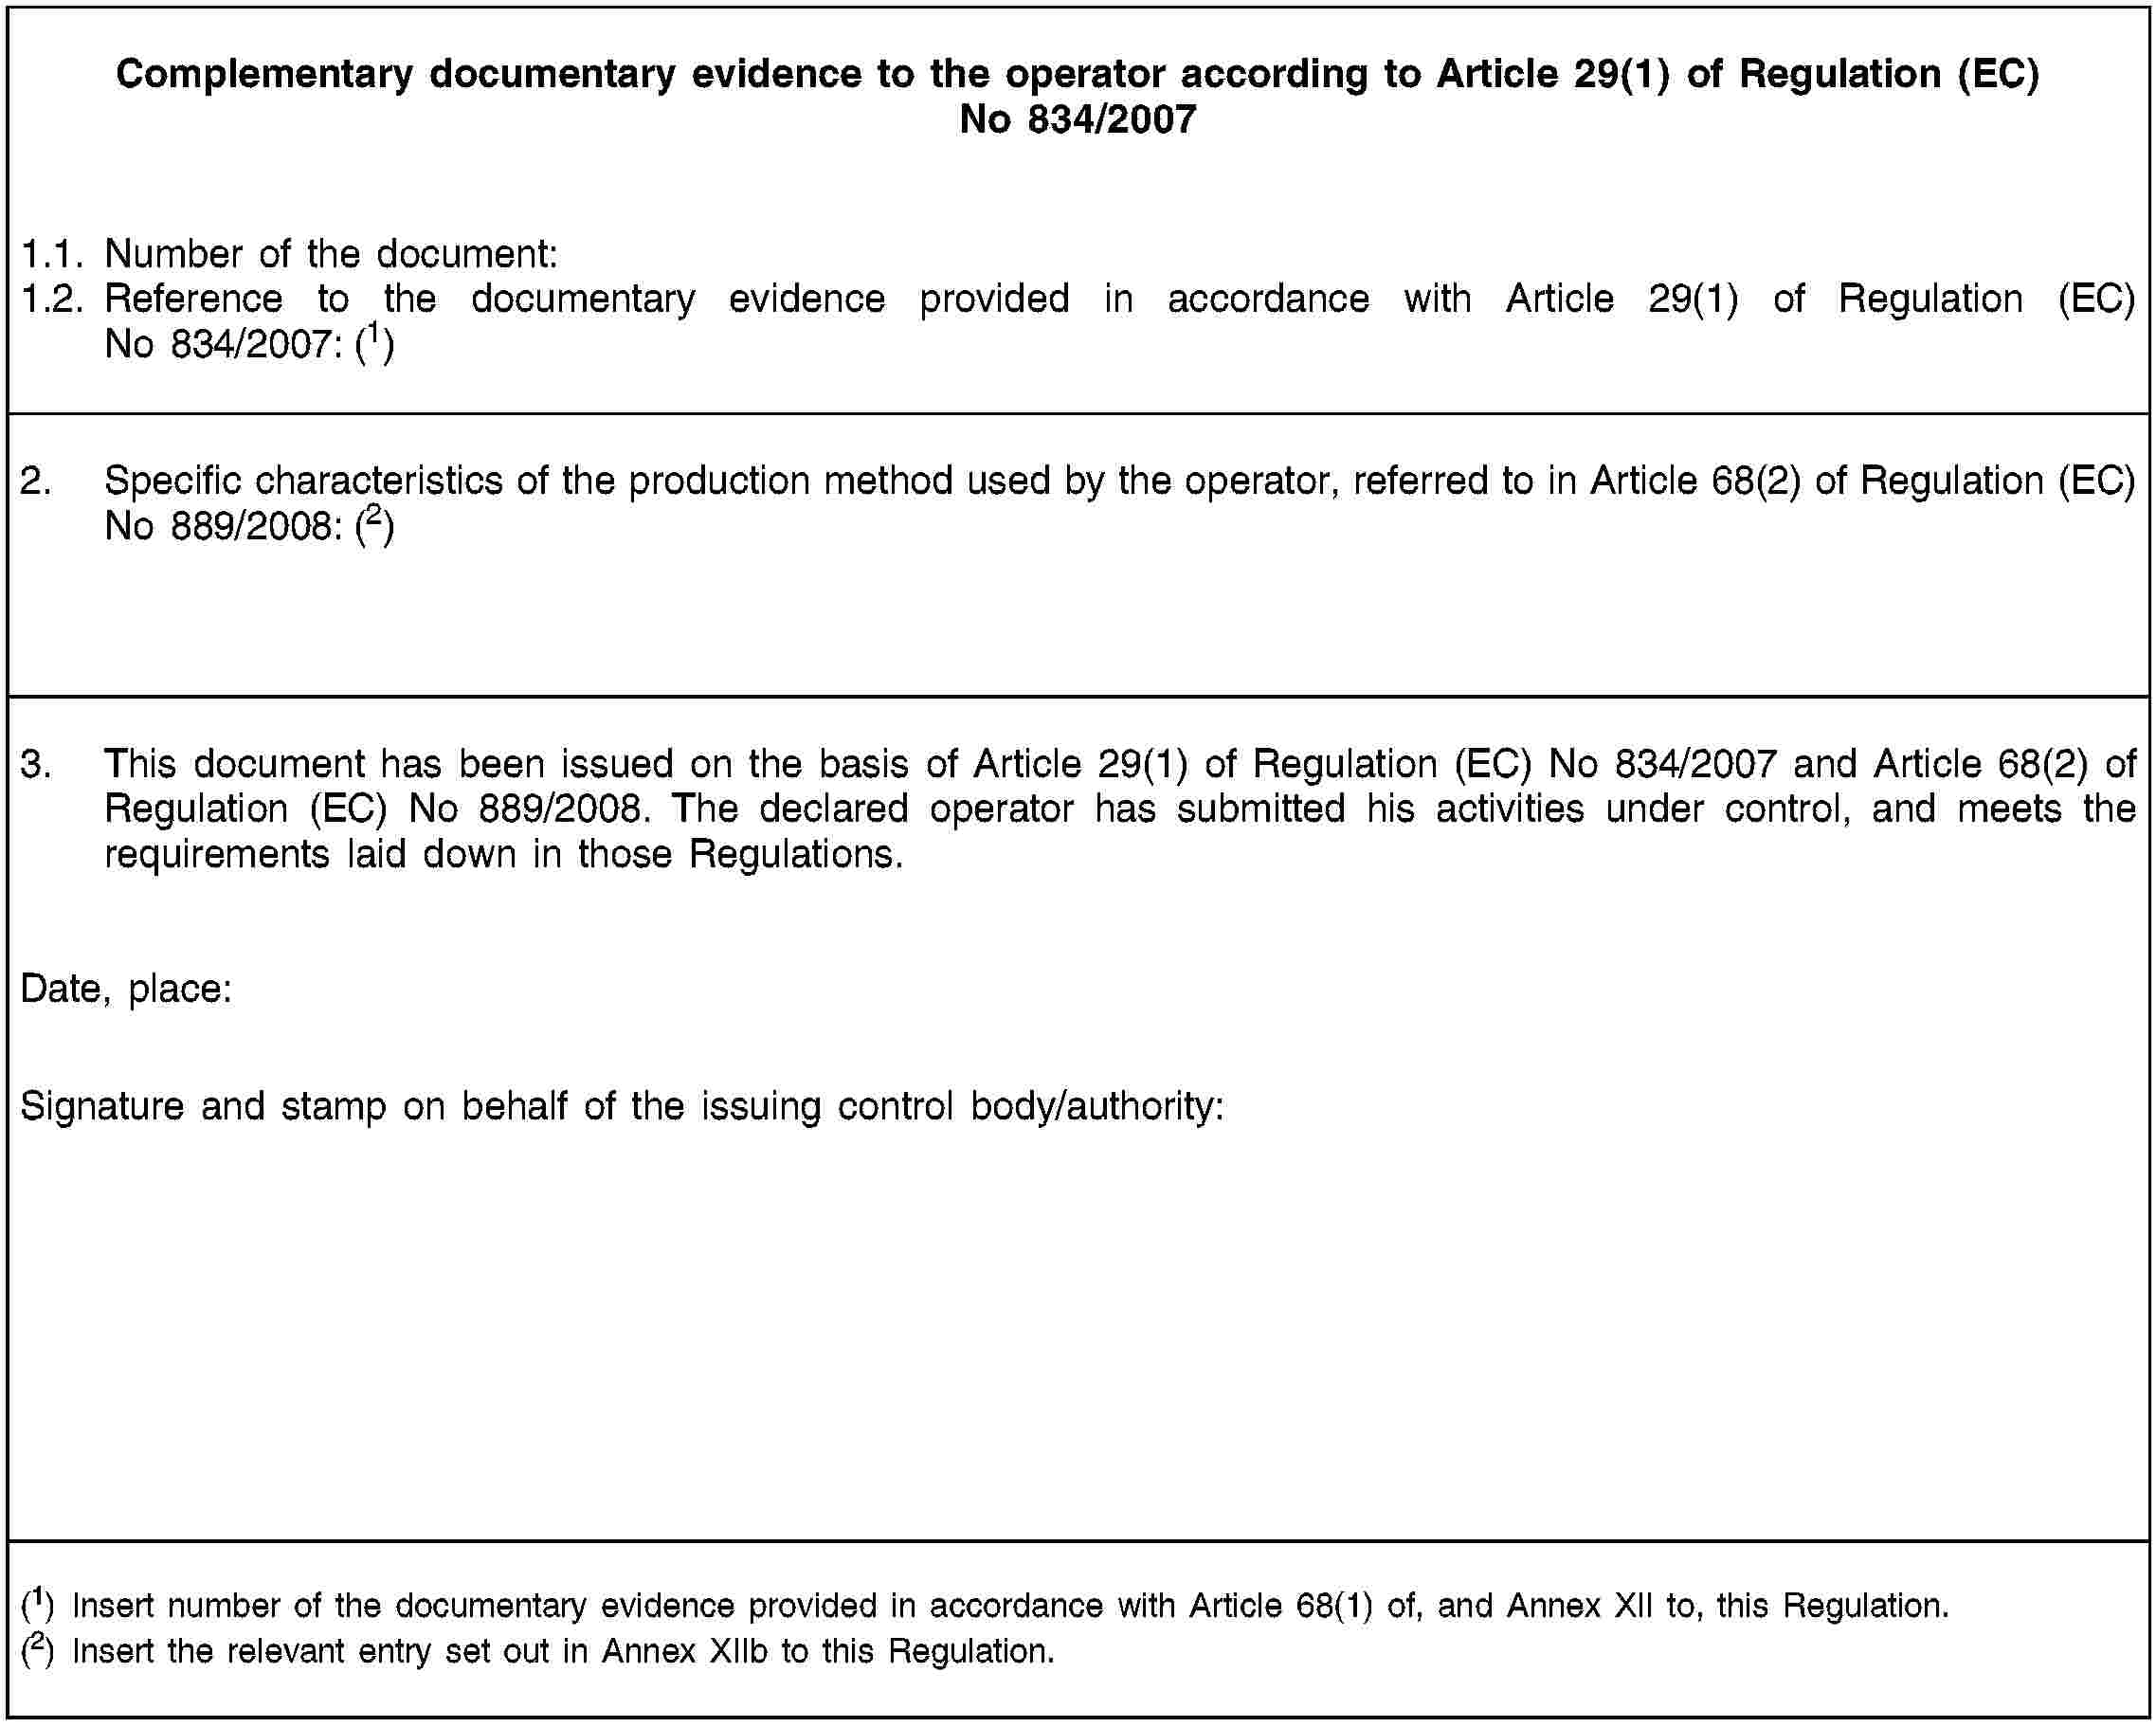 Complementary documentary evidence to the operator according to Article 29(1) of Regulation (EC) No 834/20071.1. Number of the document:1.2. Reference to the documentary evidence provided in accordance with Article 29(1) of Regulation (EC) No 834/2007: (1)2. Specific characteristics of the production method used by the operator, referred to in Article 68(2) of Regulation (EC) No 889/2008: (2)3. This document has been issued on the basis of Article 29(1) of Regulation (EC) No 834/2007 and Article 68(2) of Regulation (EC) No 889/2008. The declared operator has submitted his activities under control, and meets the requirements laid down in those Regulations.Date, place:Signature and stamp on behalf of the issuing control body/authority:(1) Insert number of the documentary evidence provided in accordance with Article 68(1) of, and Annex XII to, this Regulation.(2) Insert the relevant entry set out in Annex XIIb to this Regulation.